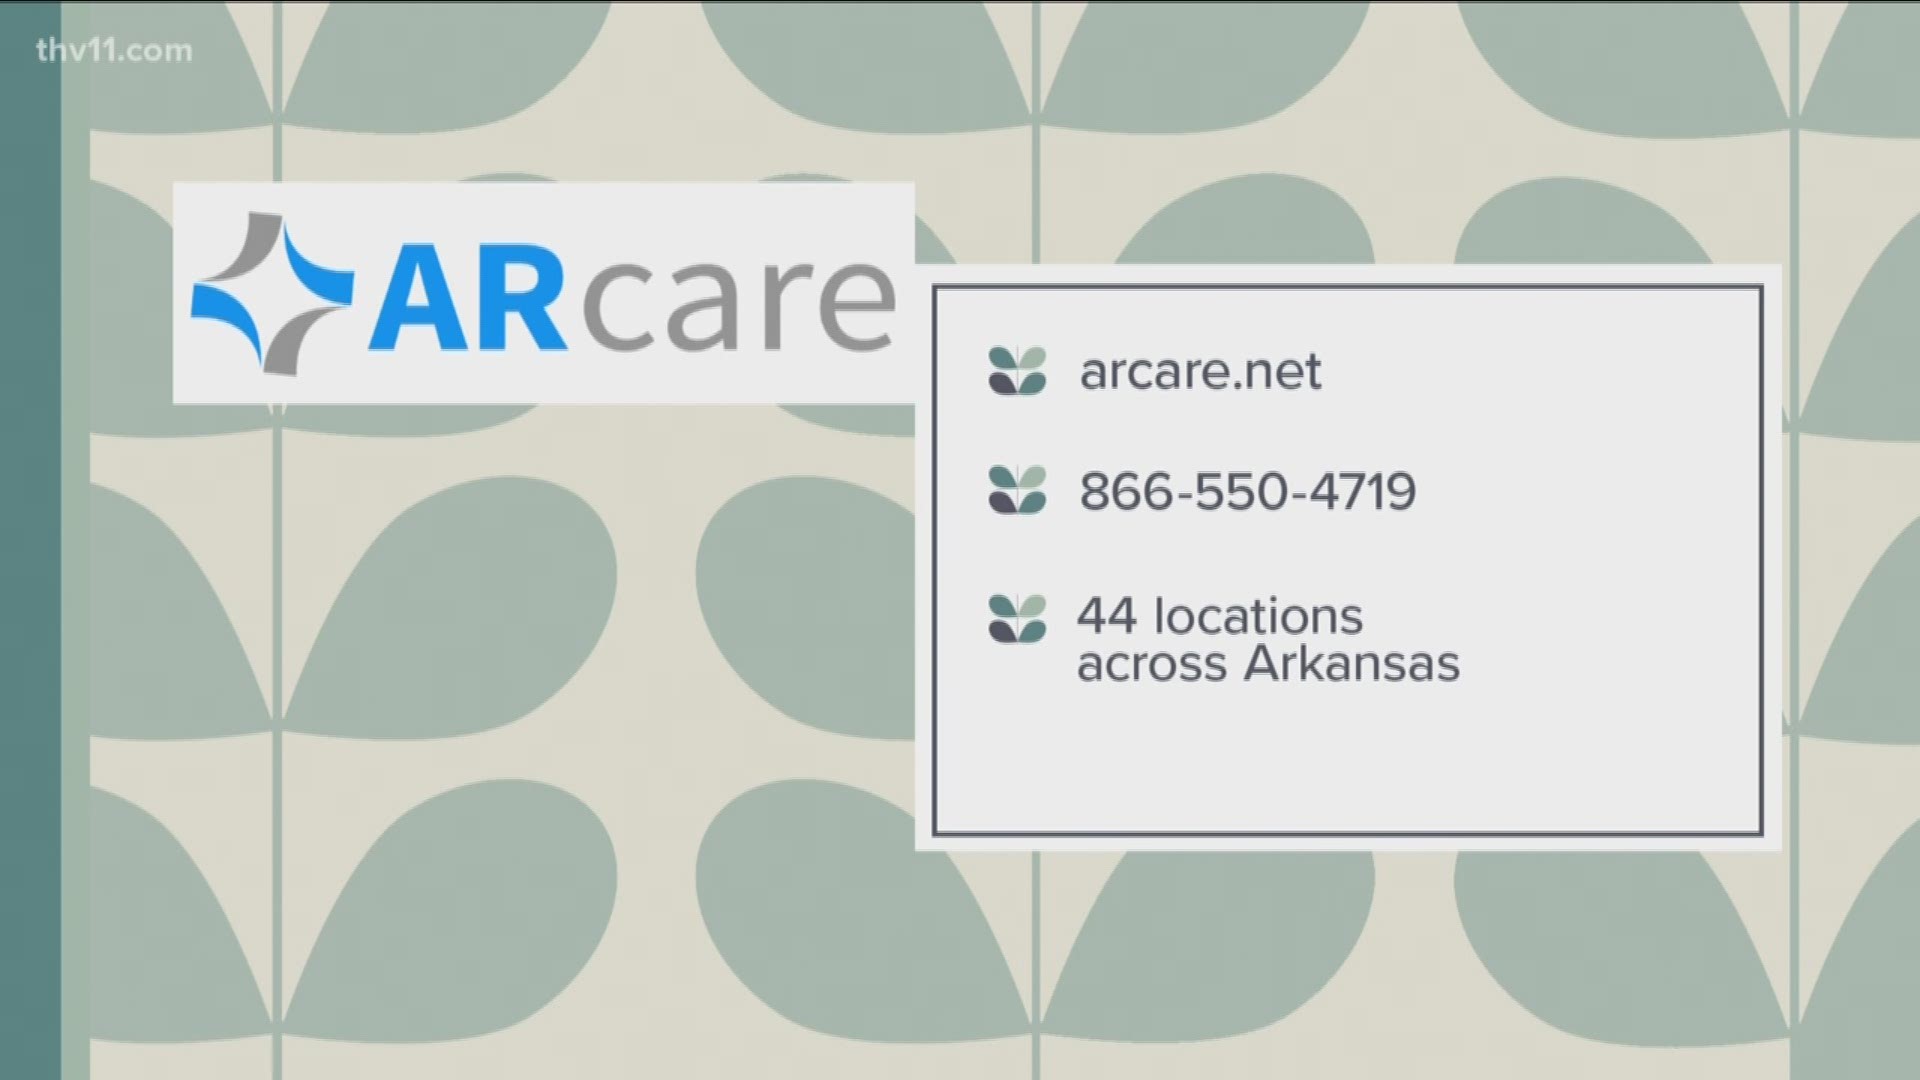 Sponsored by: ARcare